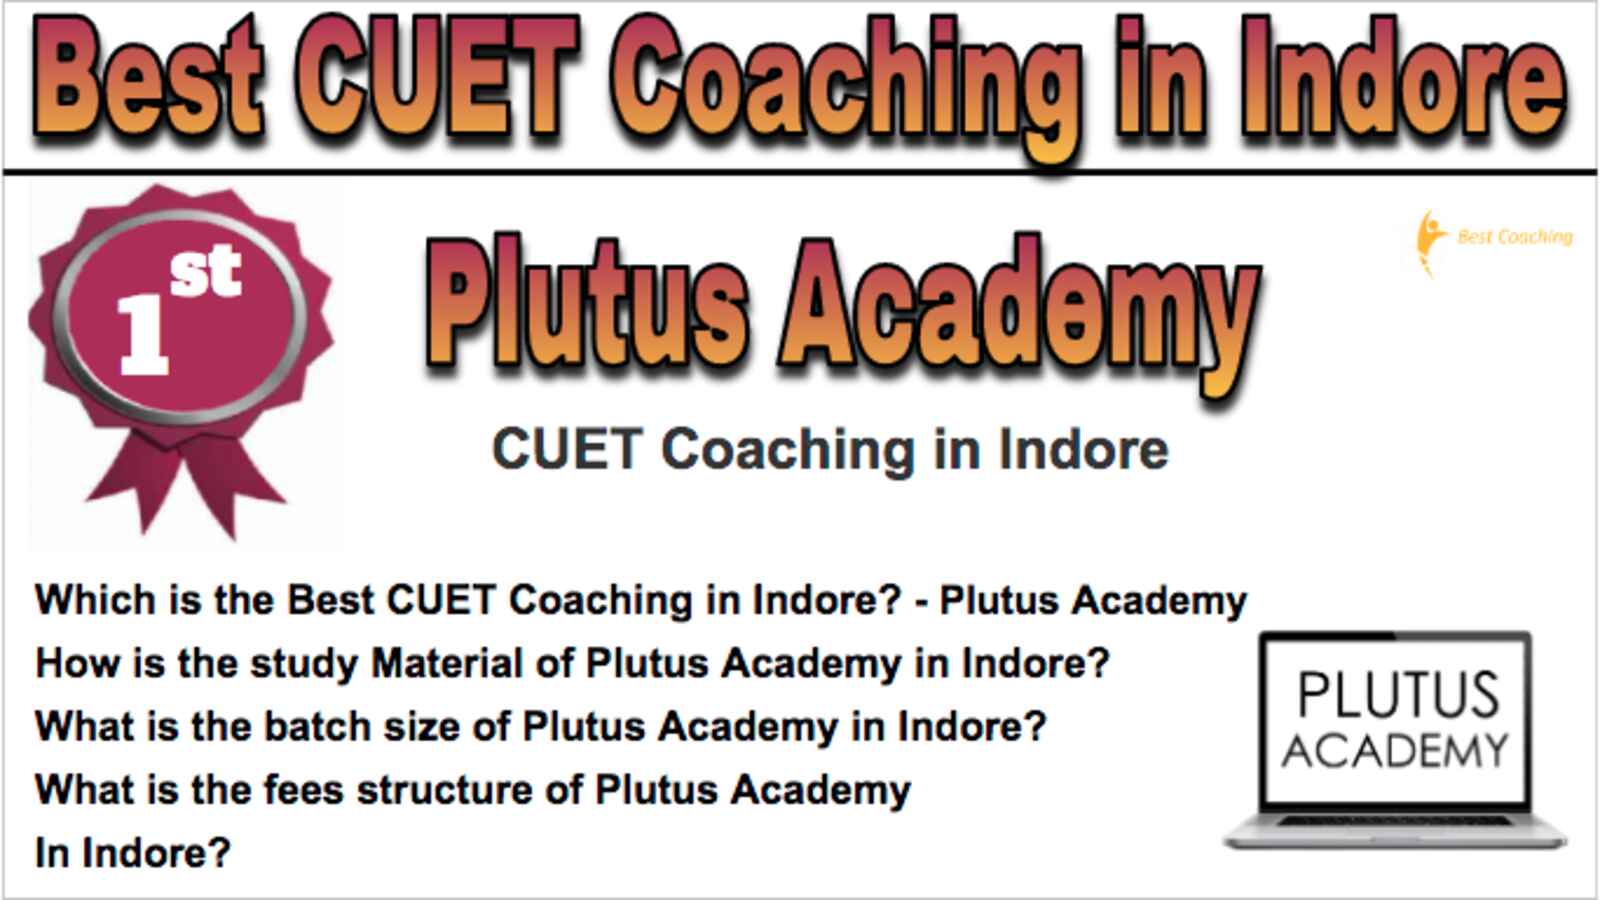 Rank 1st Best CUET Coaching in Indore